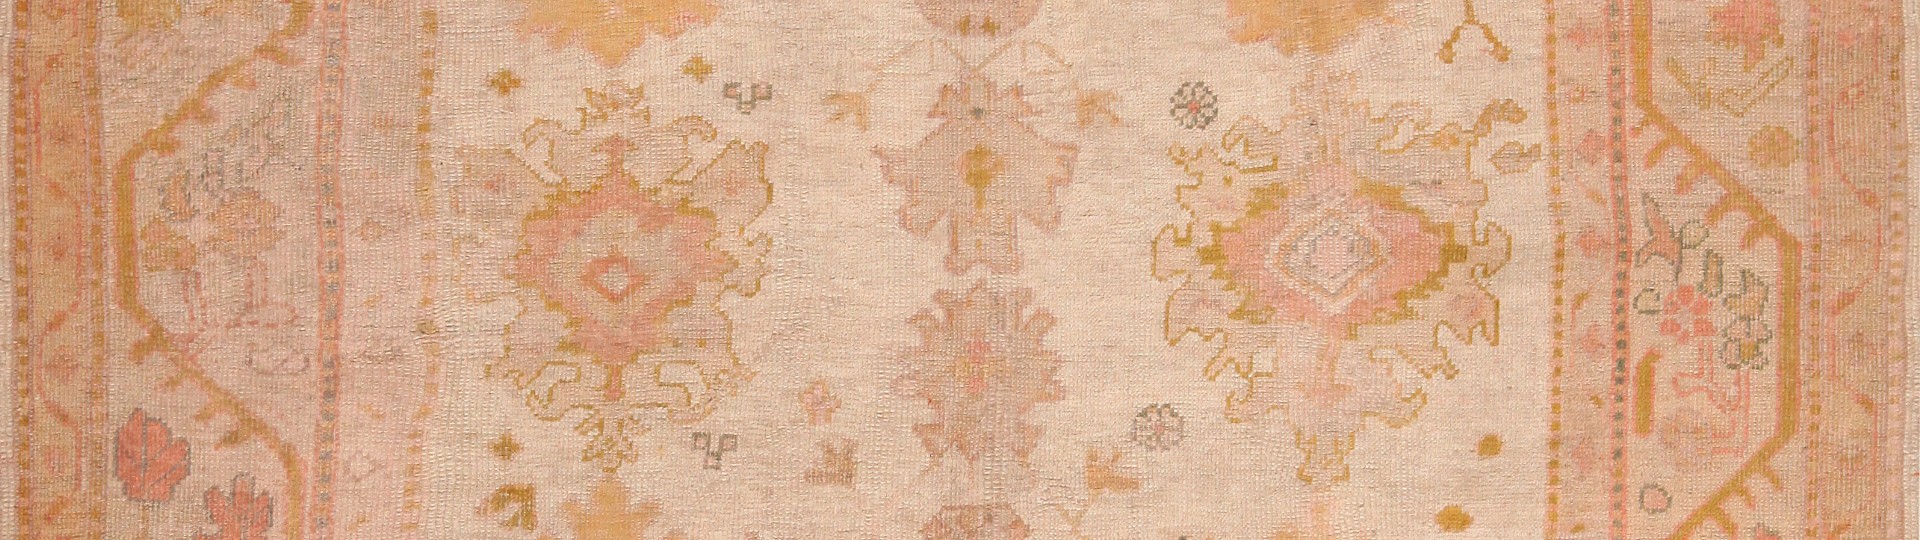 Timeless Treasures: Fine & Decorative Antique, Vintage & Modern Rugs by Nazmiyal Auction